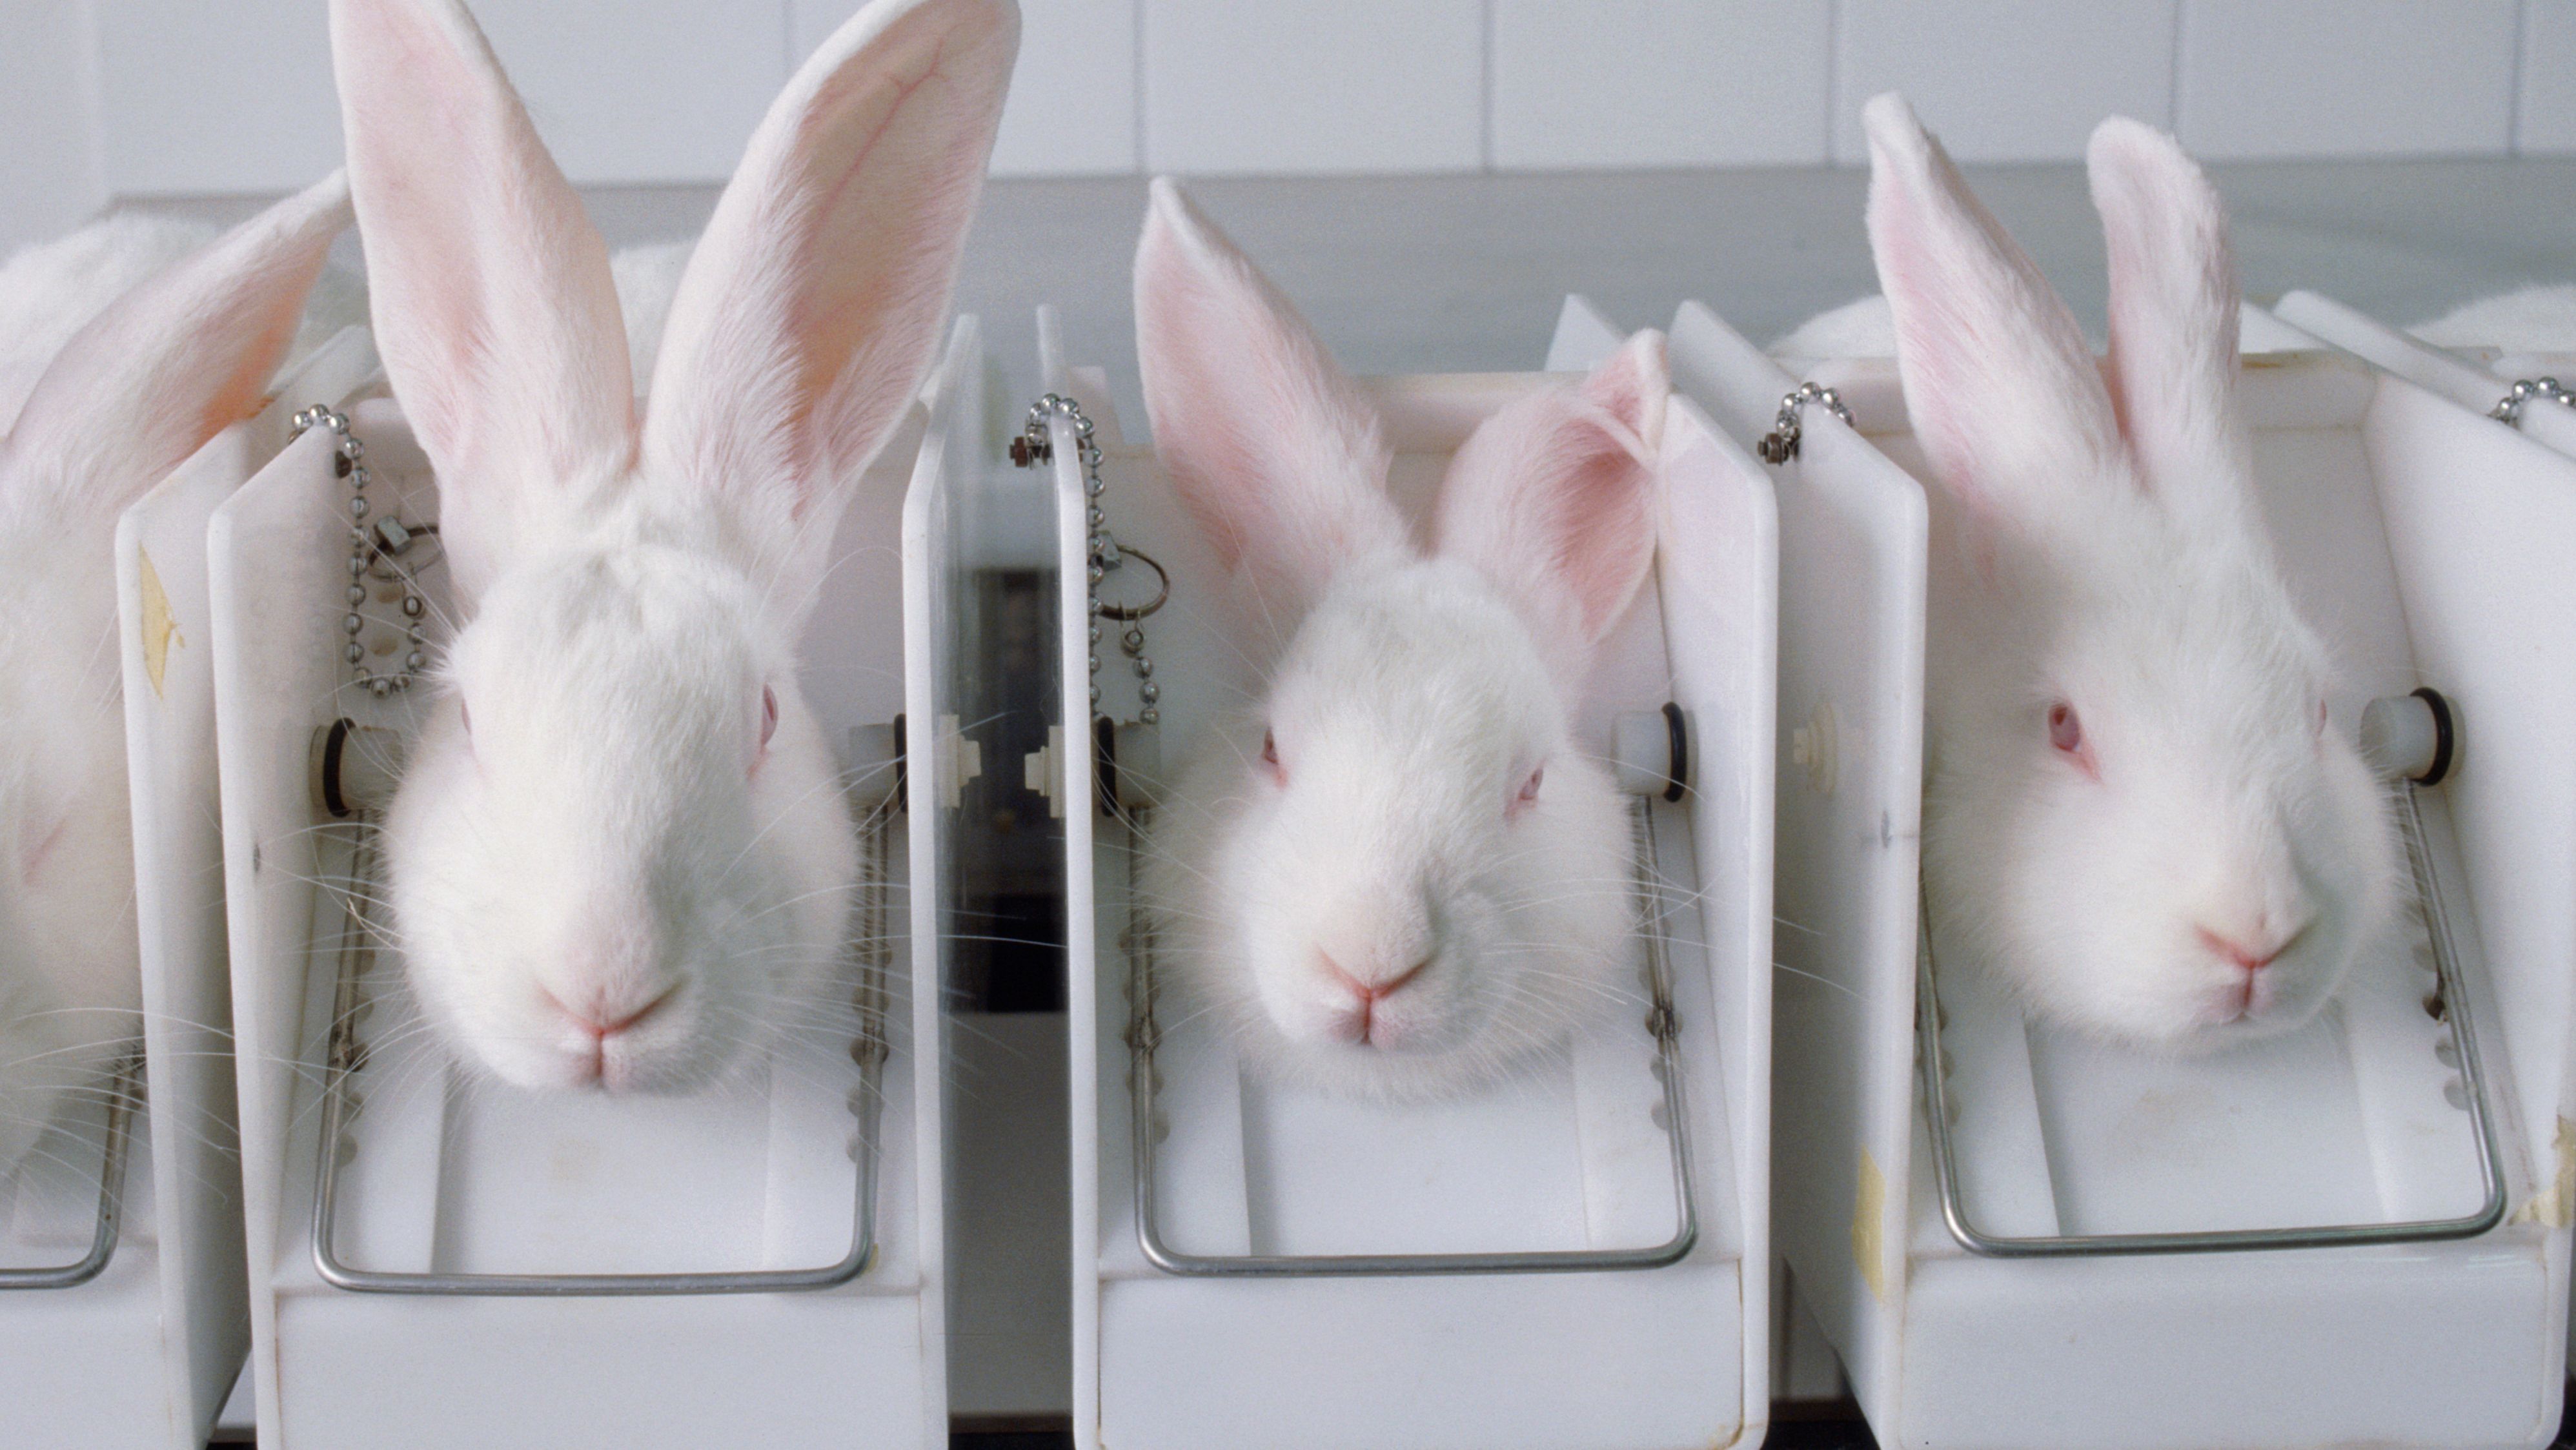 New York has become the tenth state to ban cosmetics testing on animals.